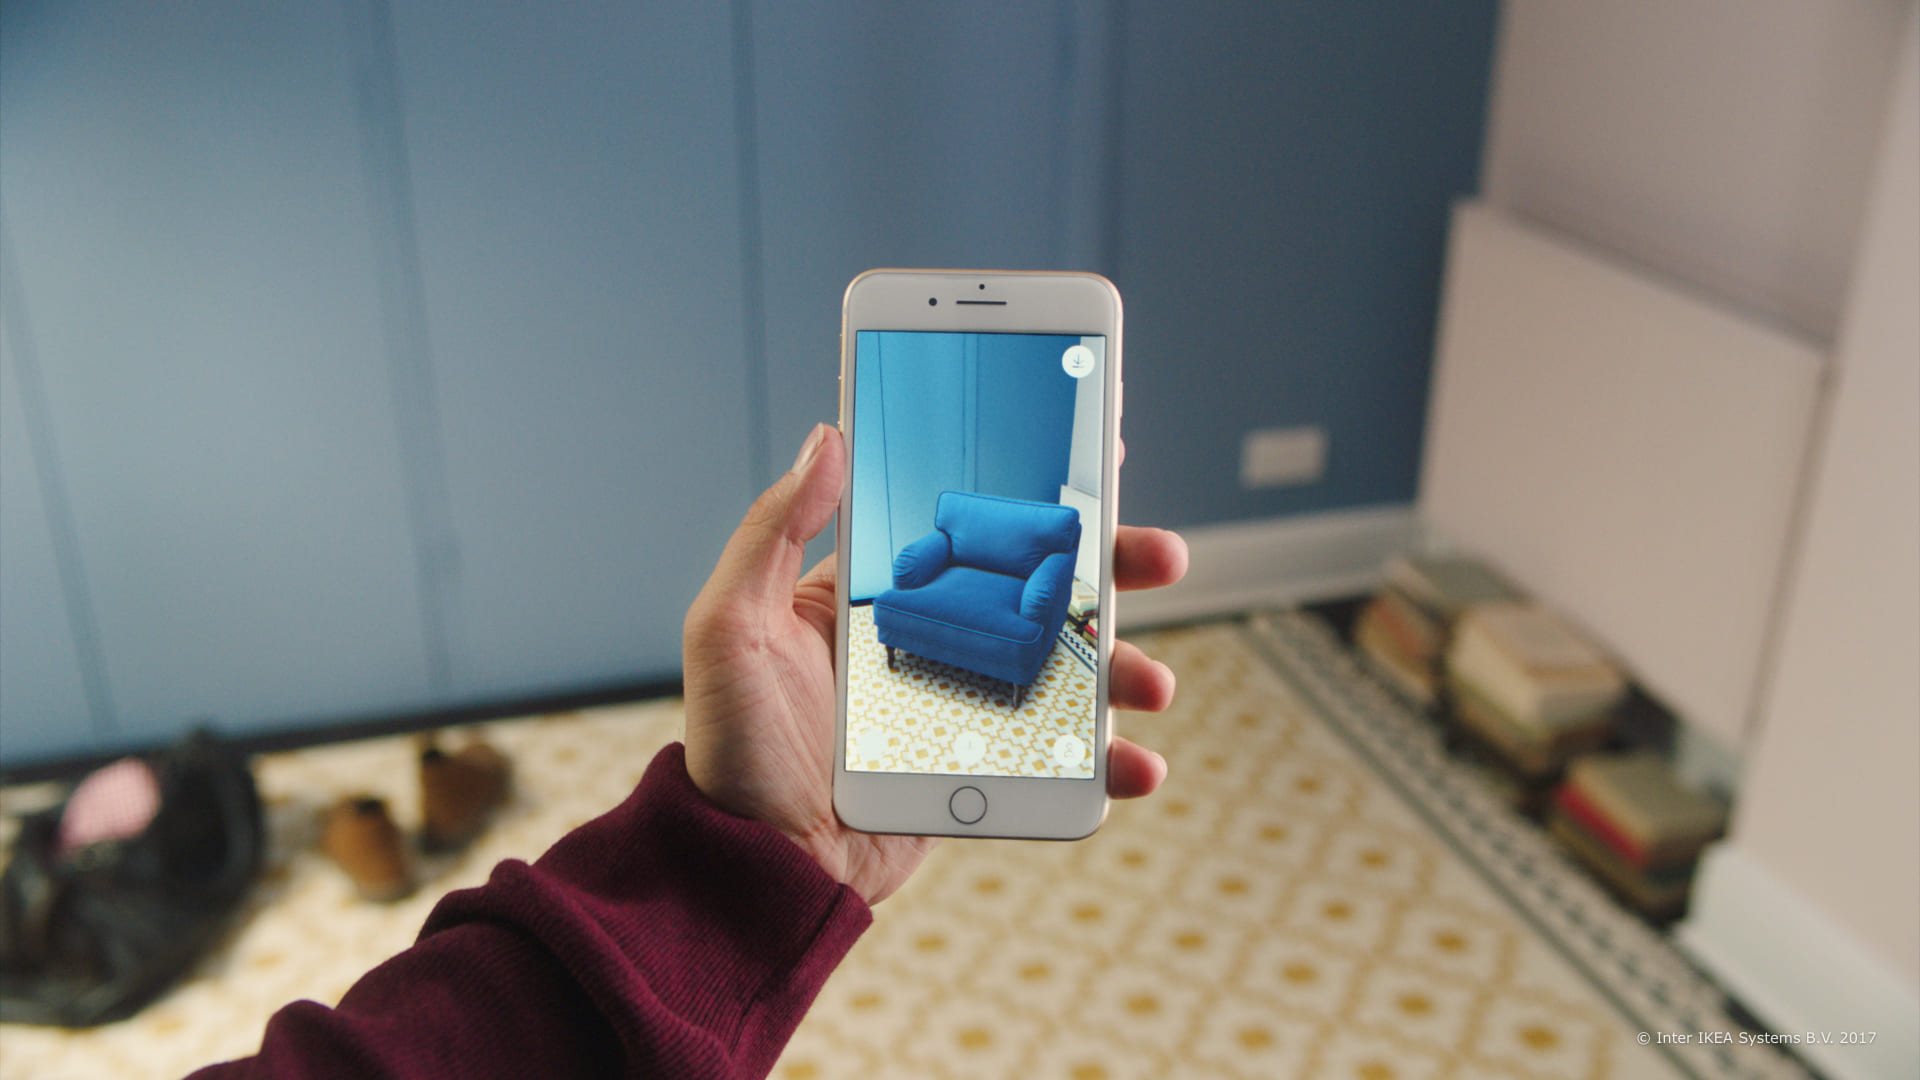 An example of augmented reality app development in retail - Ikea app